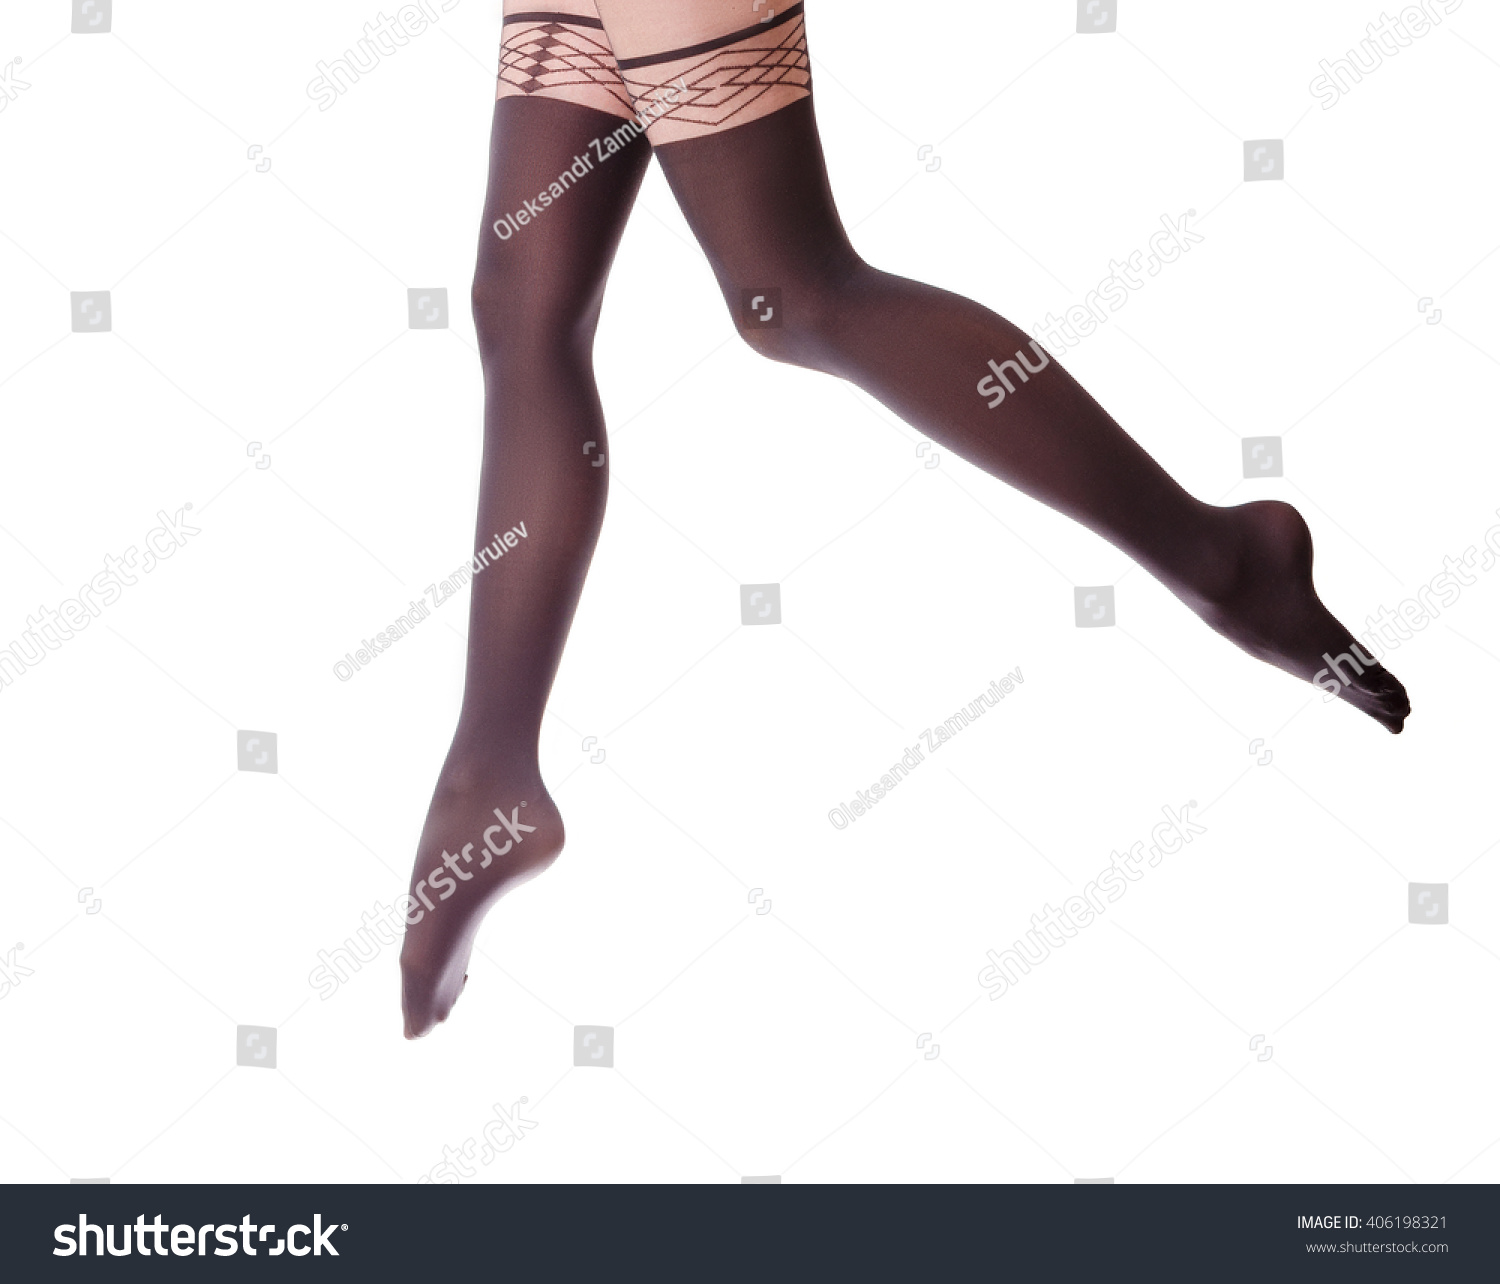 girls covered in pantyhose